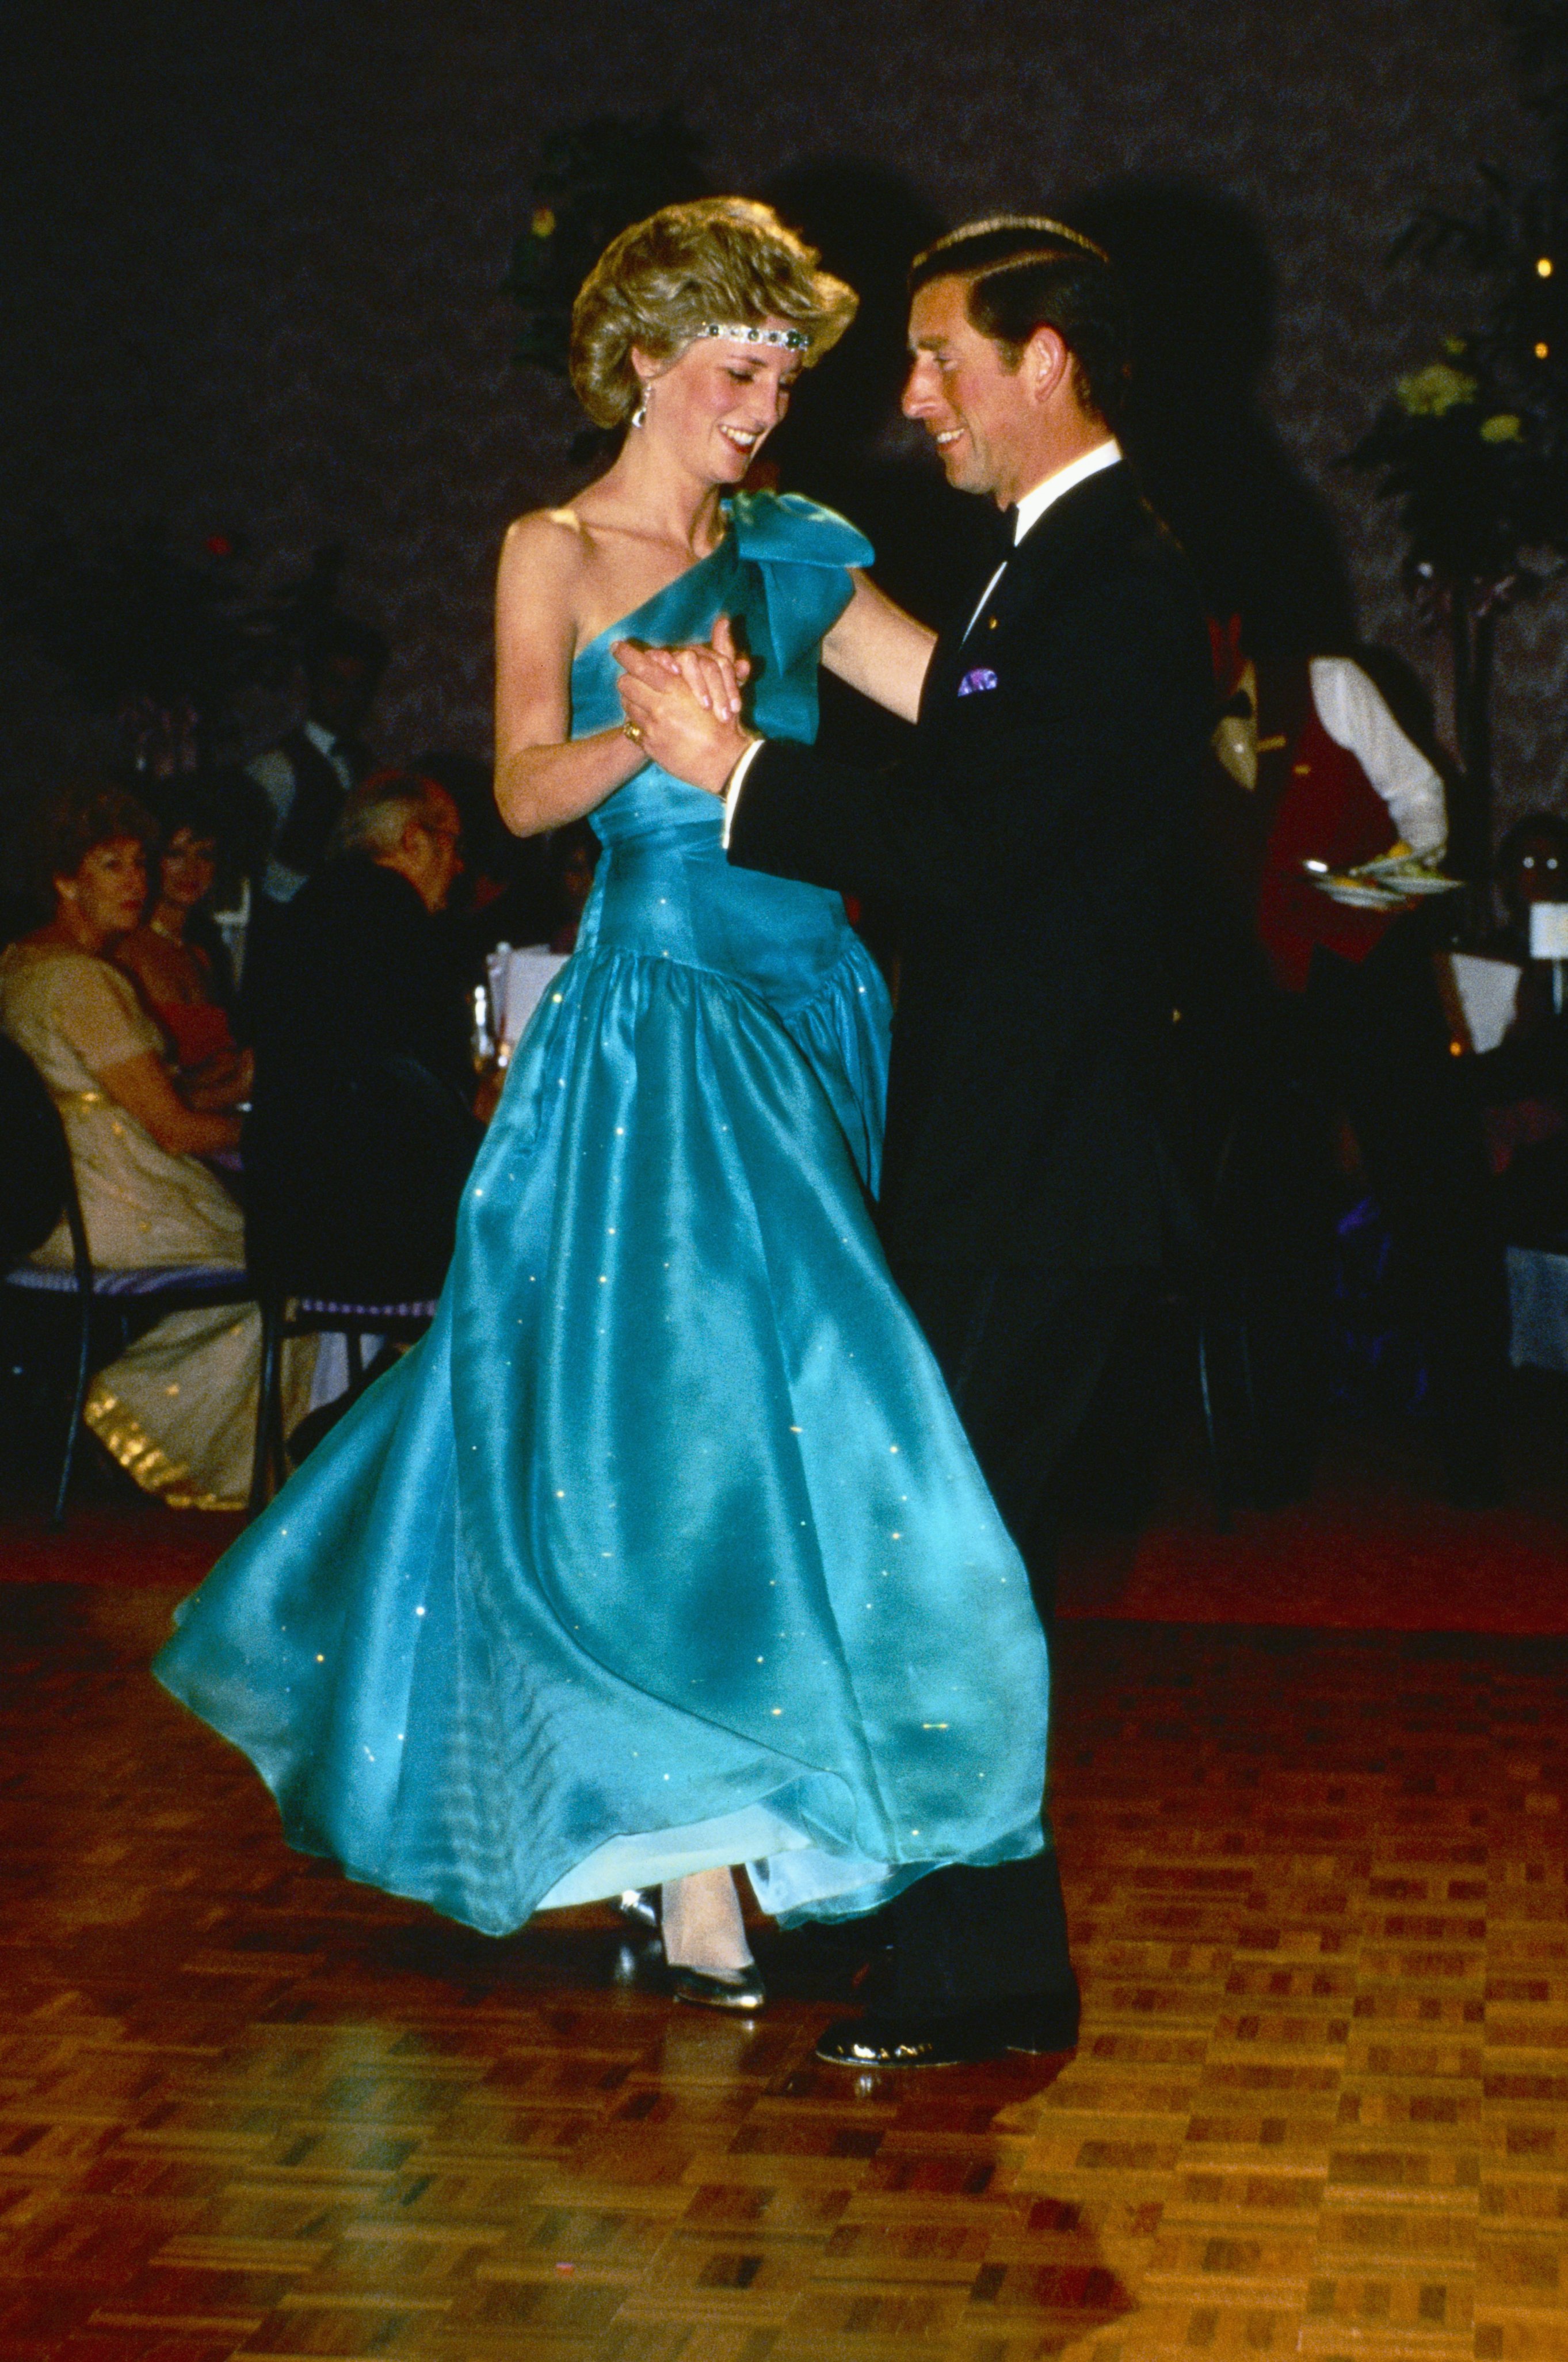 Princess Diana and Prince Charles dance at a formal event. | Source: Getty Images